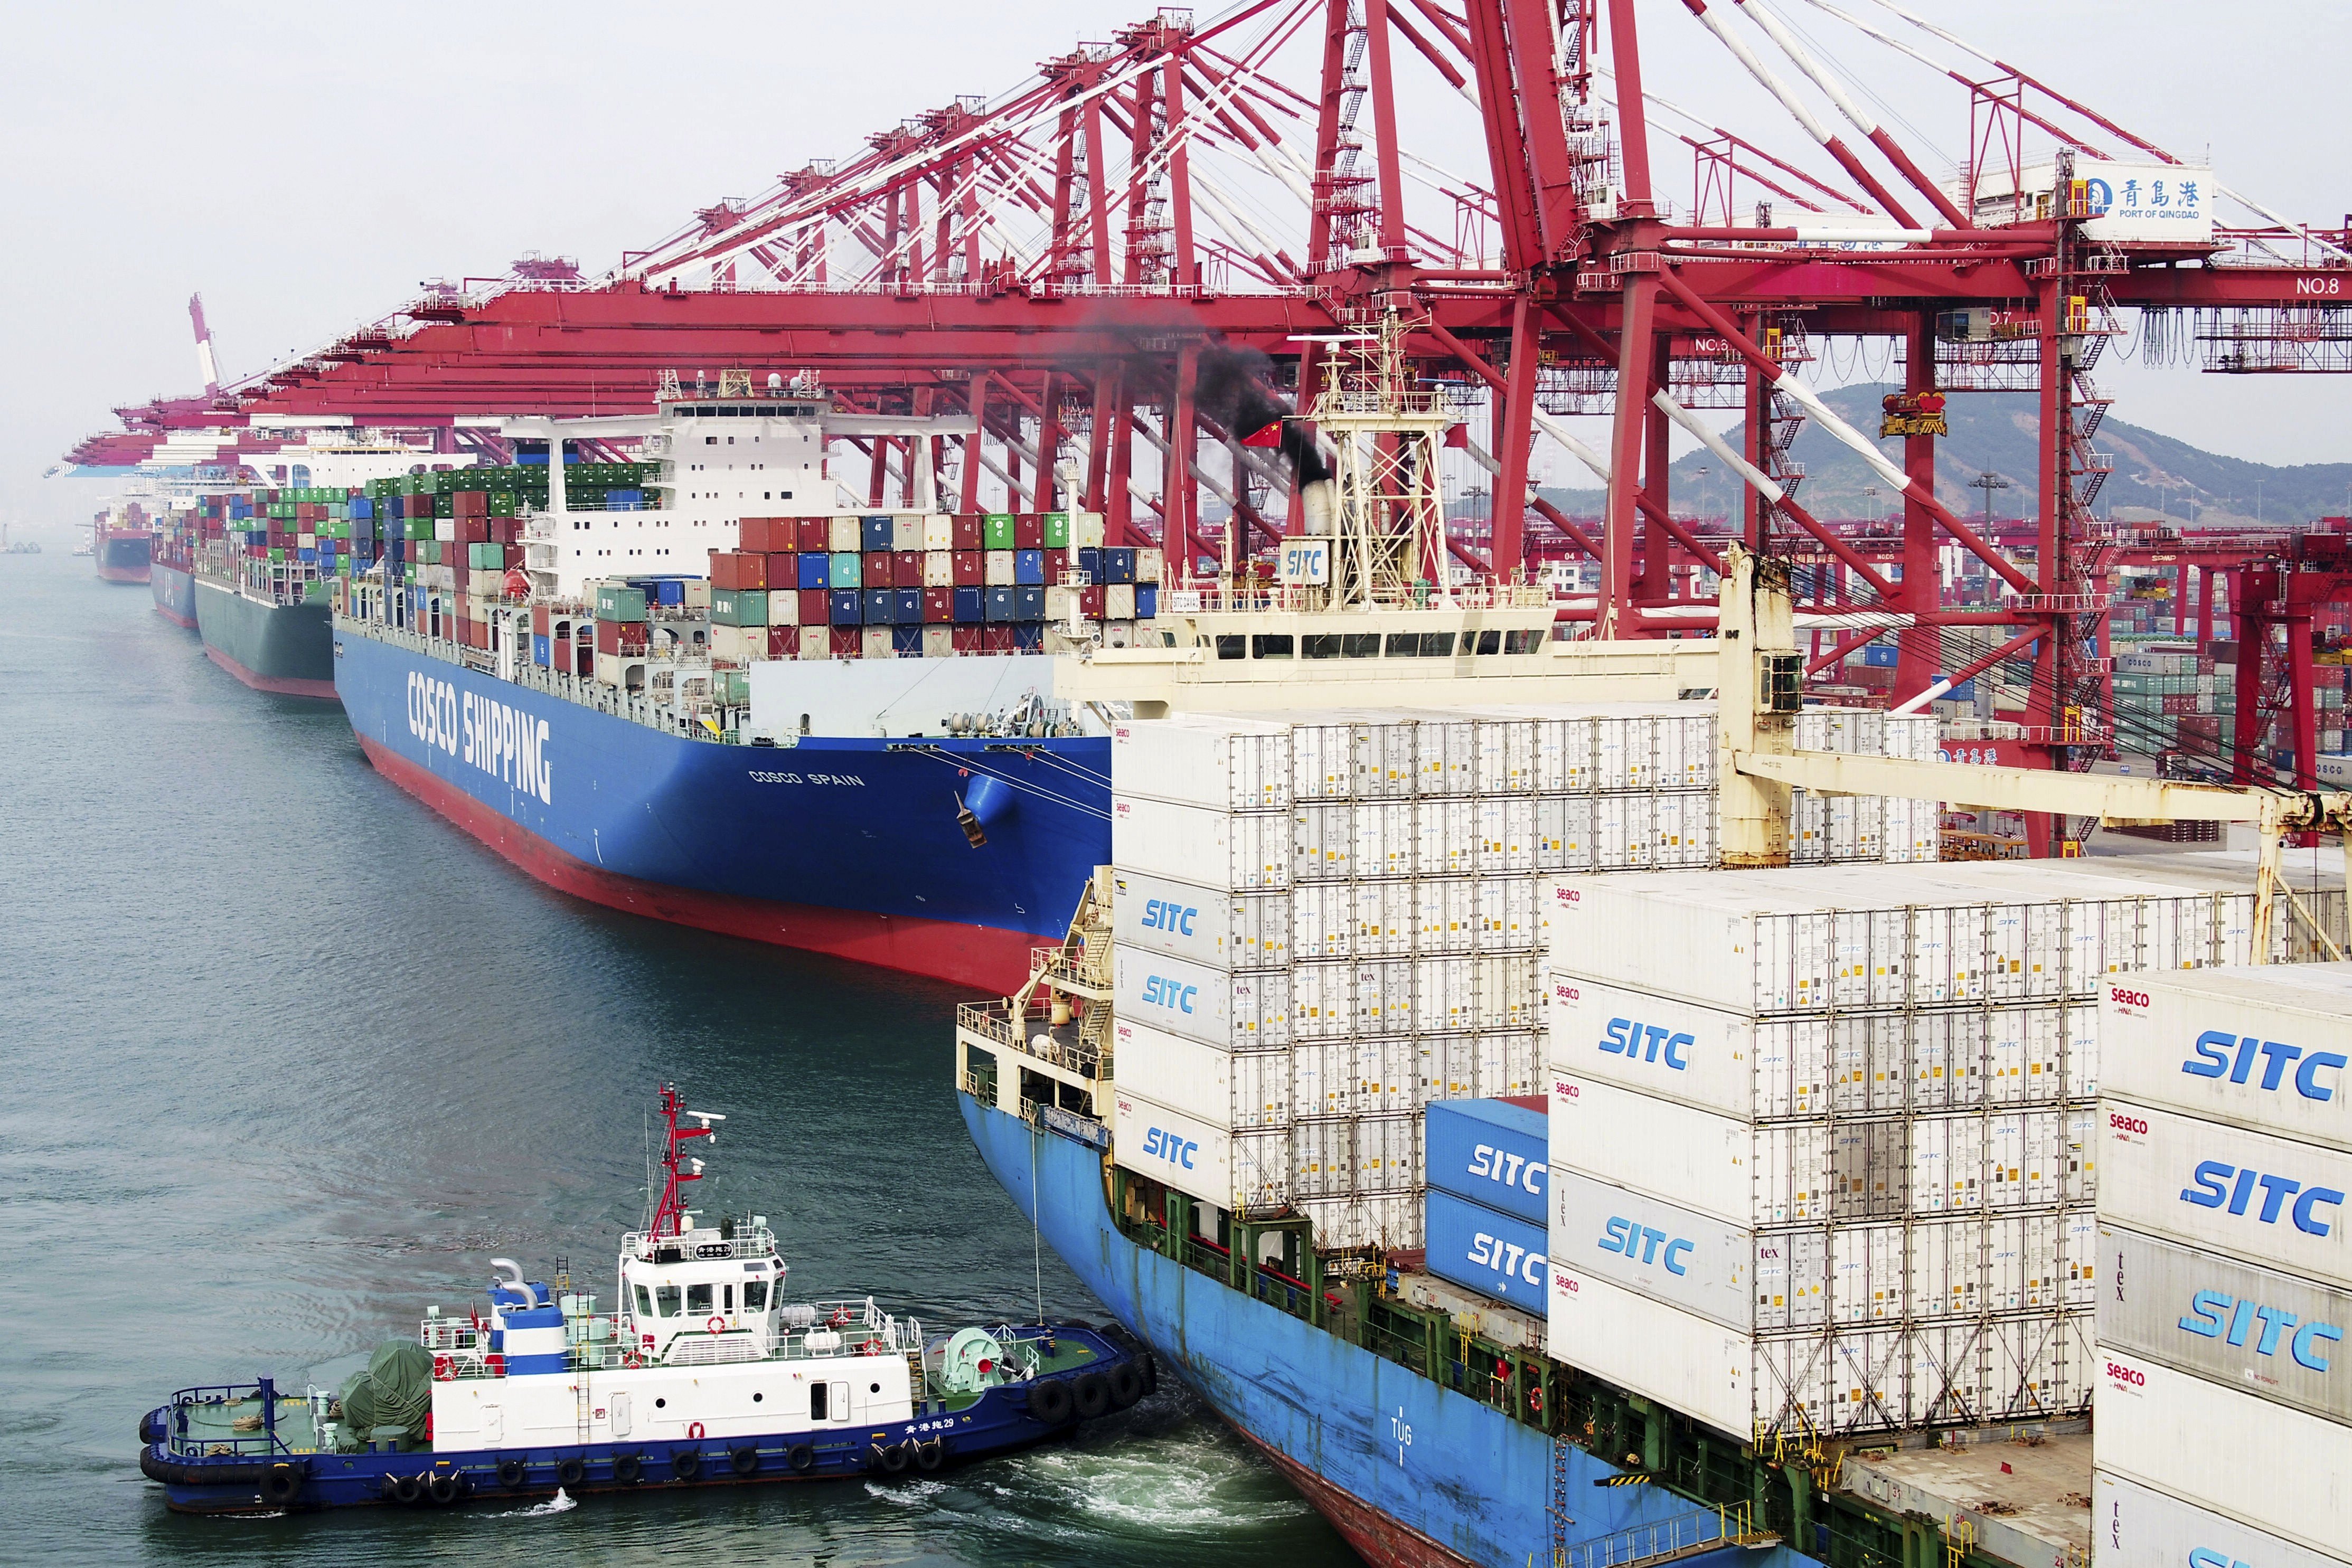 China’s exports to the United States contracted by 8.1 per cent, a sharp reversal from the 13.5 per cent rise during the first half of 2018, according to data from the National Bureau of Statistics. Photo: AP